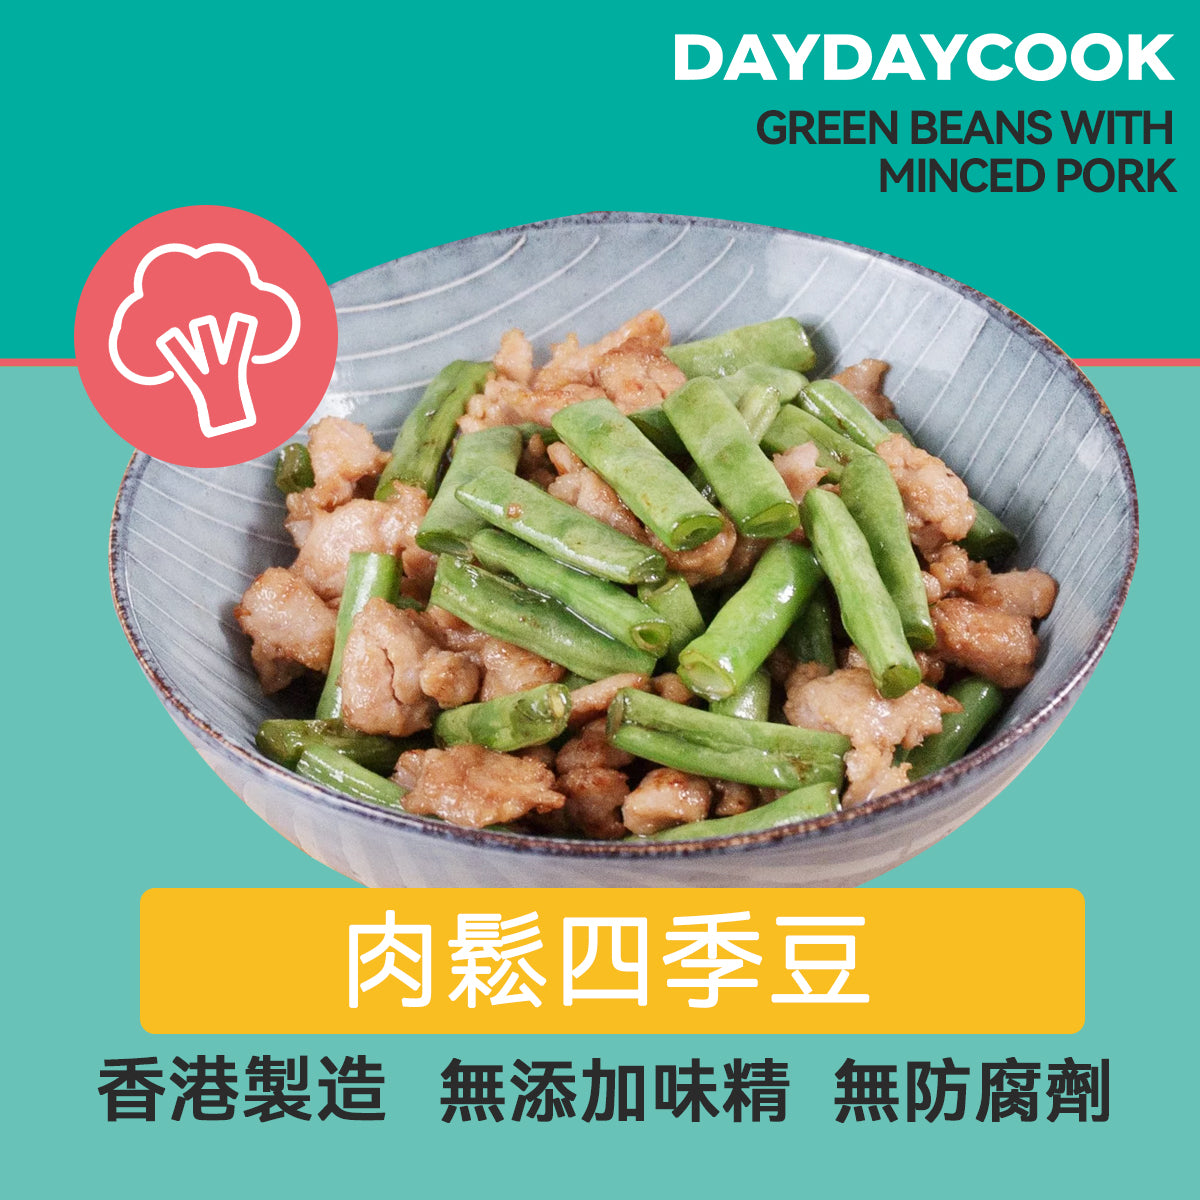 Green Beans with Minced Pork